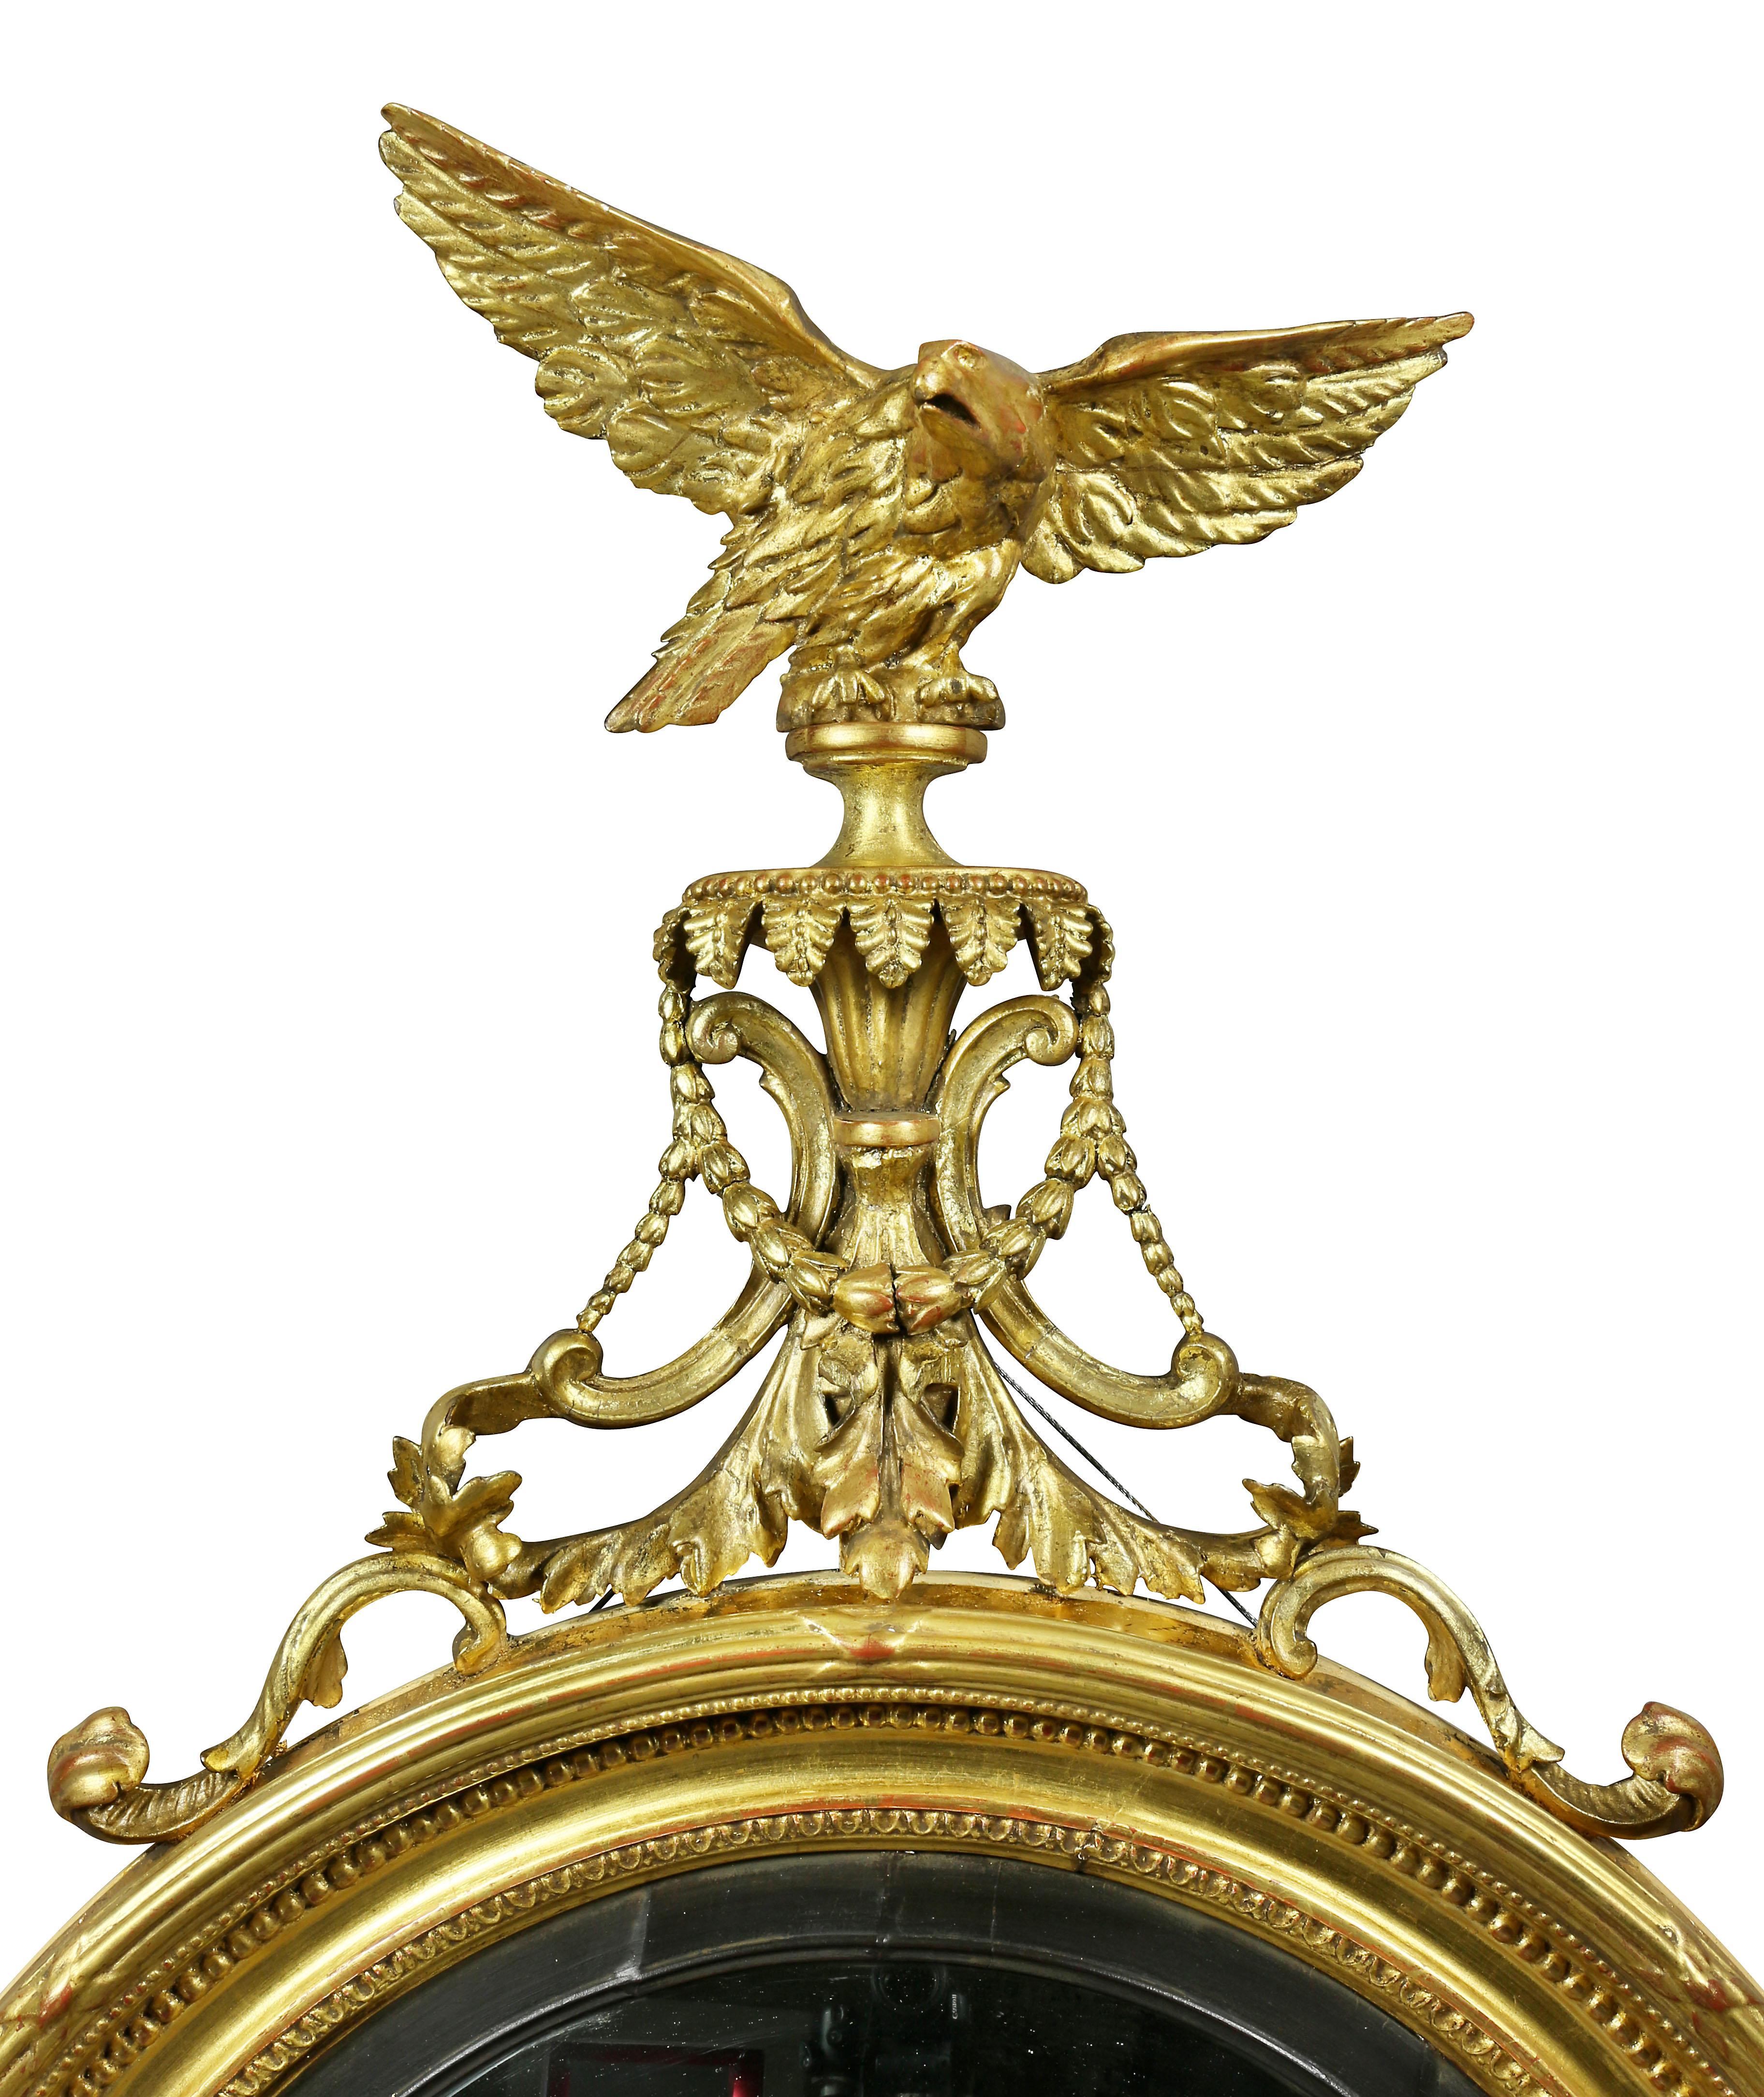 With eagle finial with outspread wings over bellflower and acanthus carved plinth over a circular convex glass with black outer ring within a beaded and ribbon and reed frame, base with applied acanthus carving.